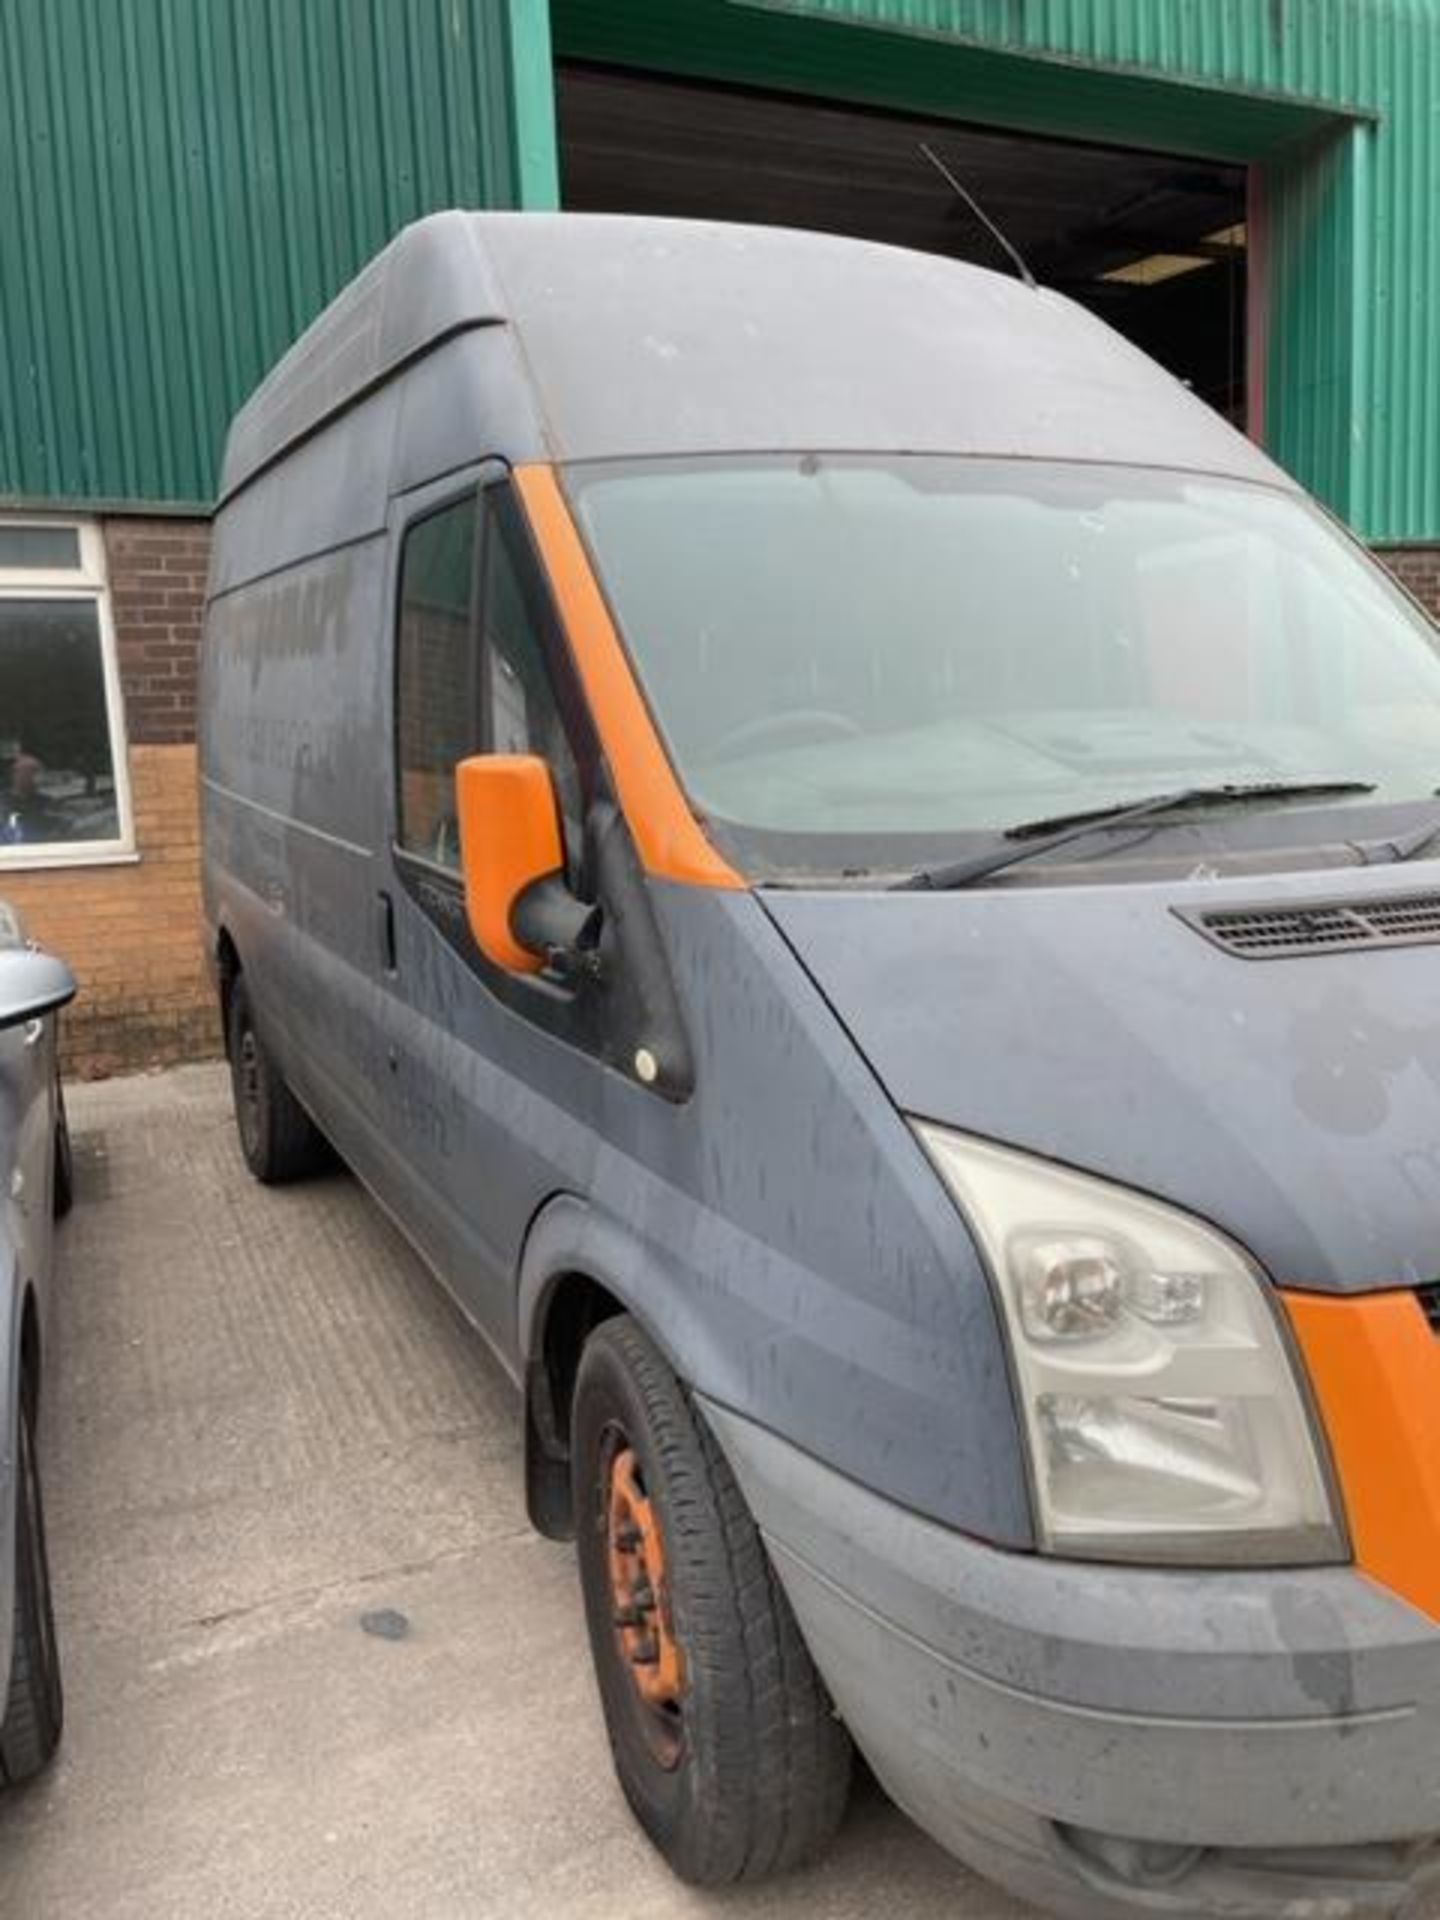 Ford Transit 350 MWB FWD High Roof Van (NON-RUNNER), Registration DN11 VYL, First Registered 18th - Image 2 of 6